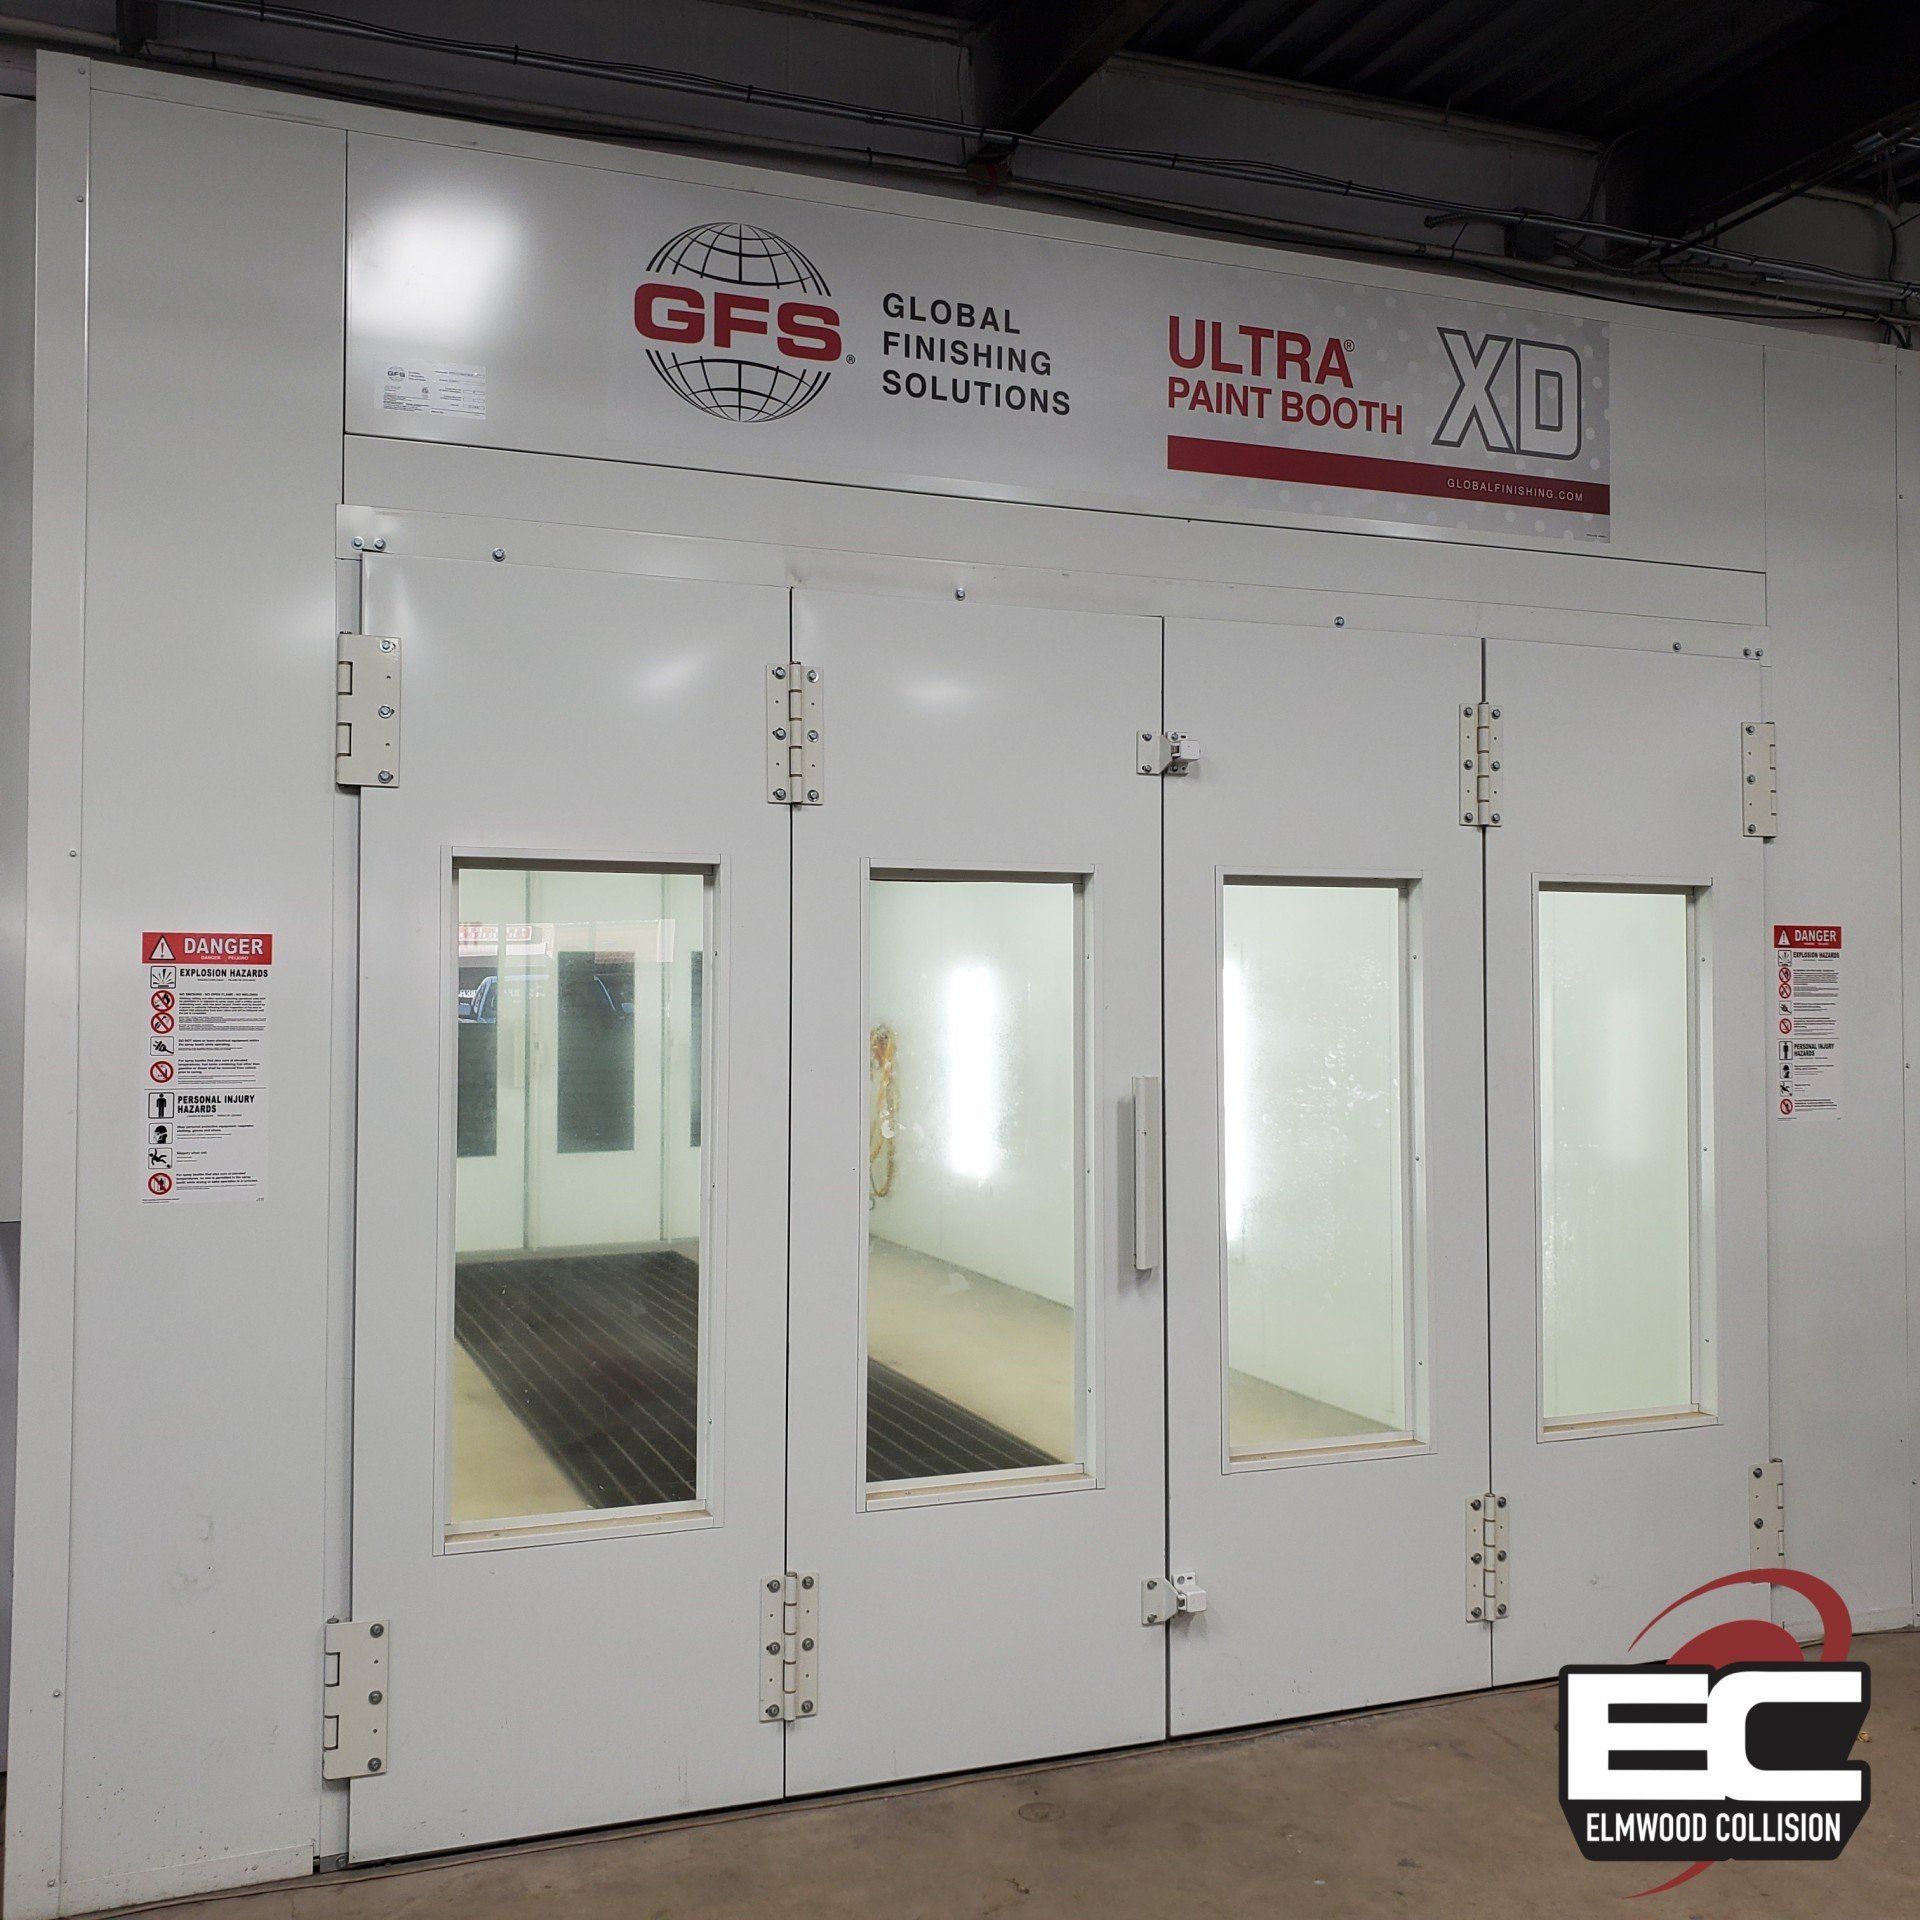 Ultra XD Paint Booth by Global Finishing Solutions at Elmwood Collision.